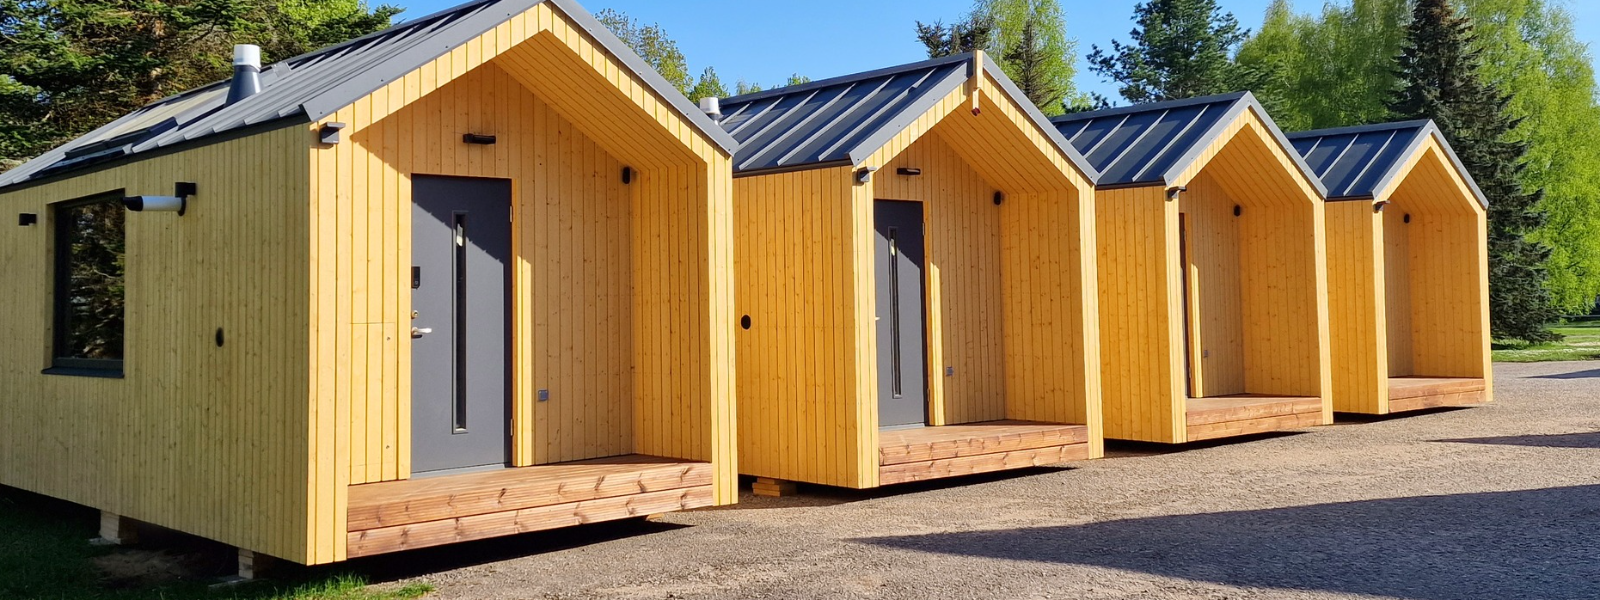 WOHOM OÜ - modular houses, prefabricated wooden buildings, adhesive log buildings, sauna houses, construction services, l...